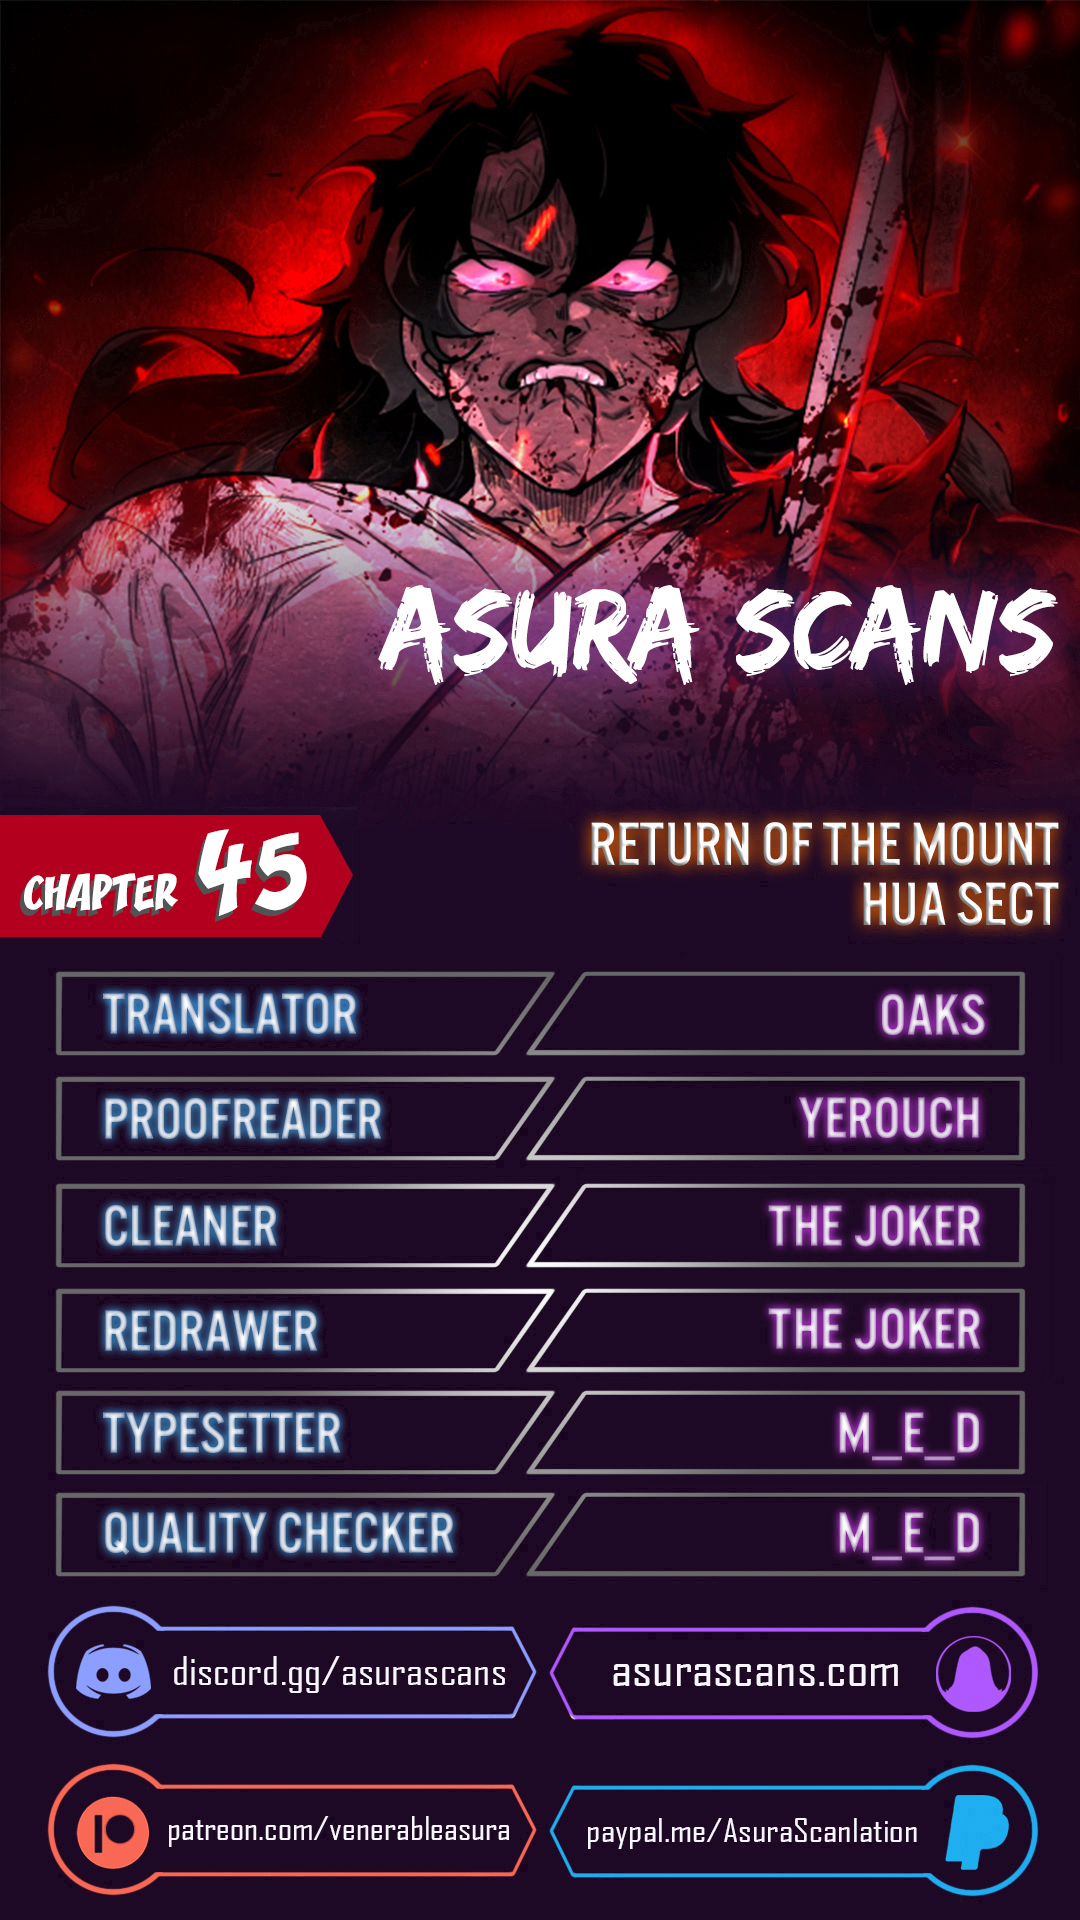 Return of the Mount Hua Sect - Chapter 14259 - Image 1